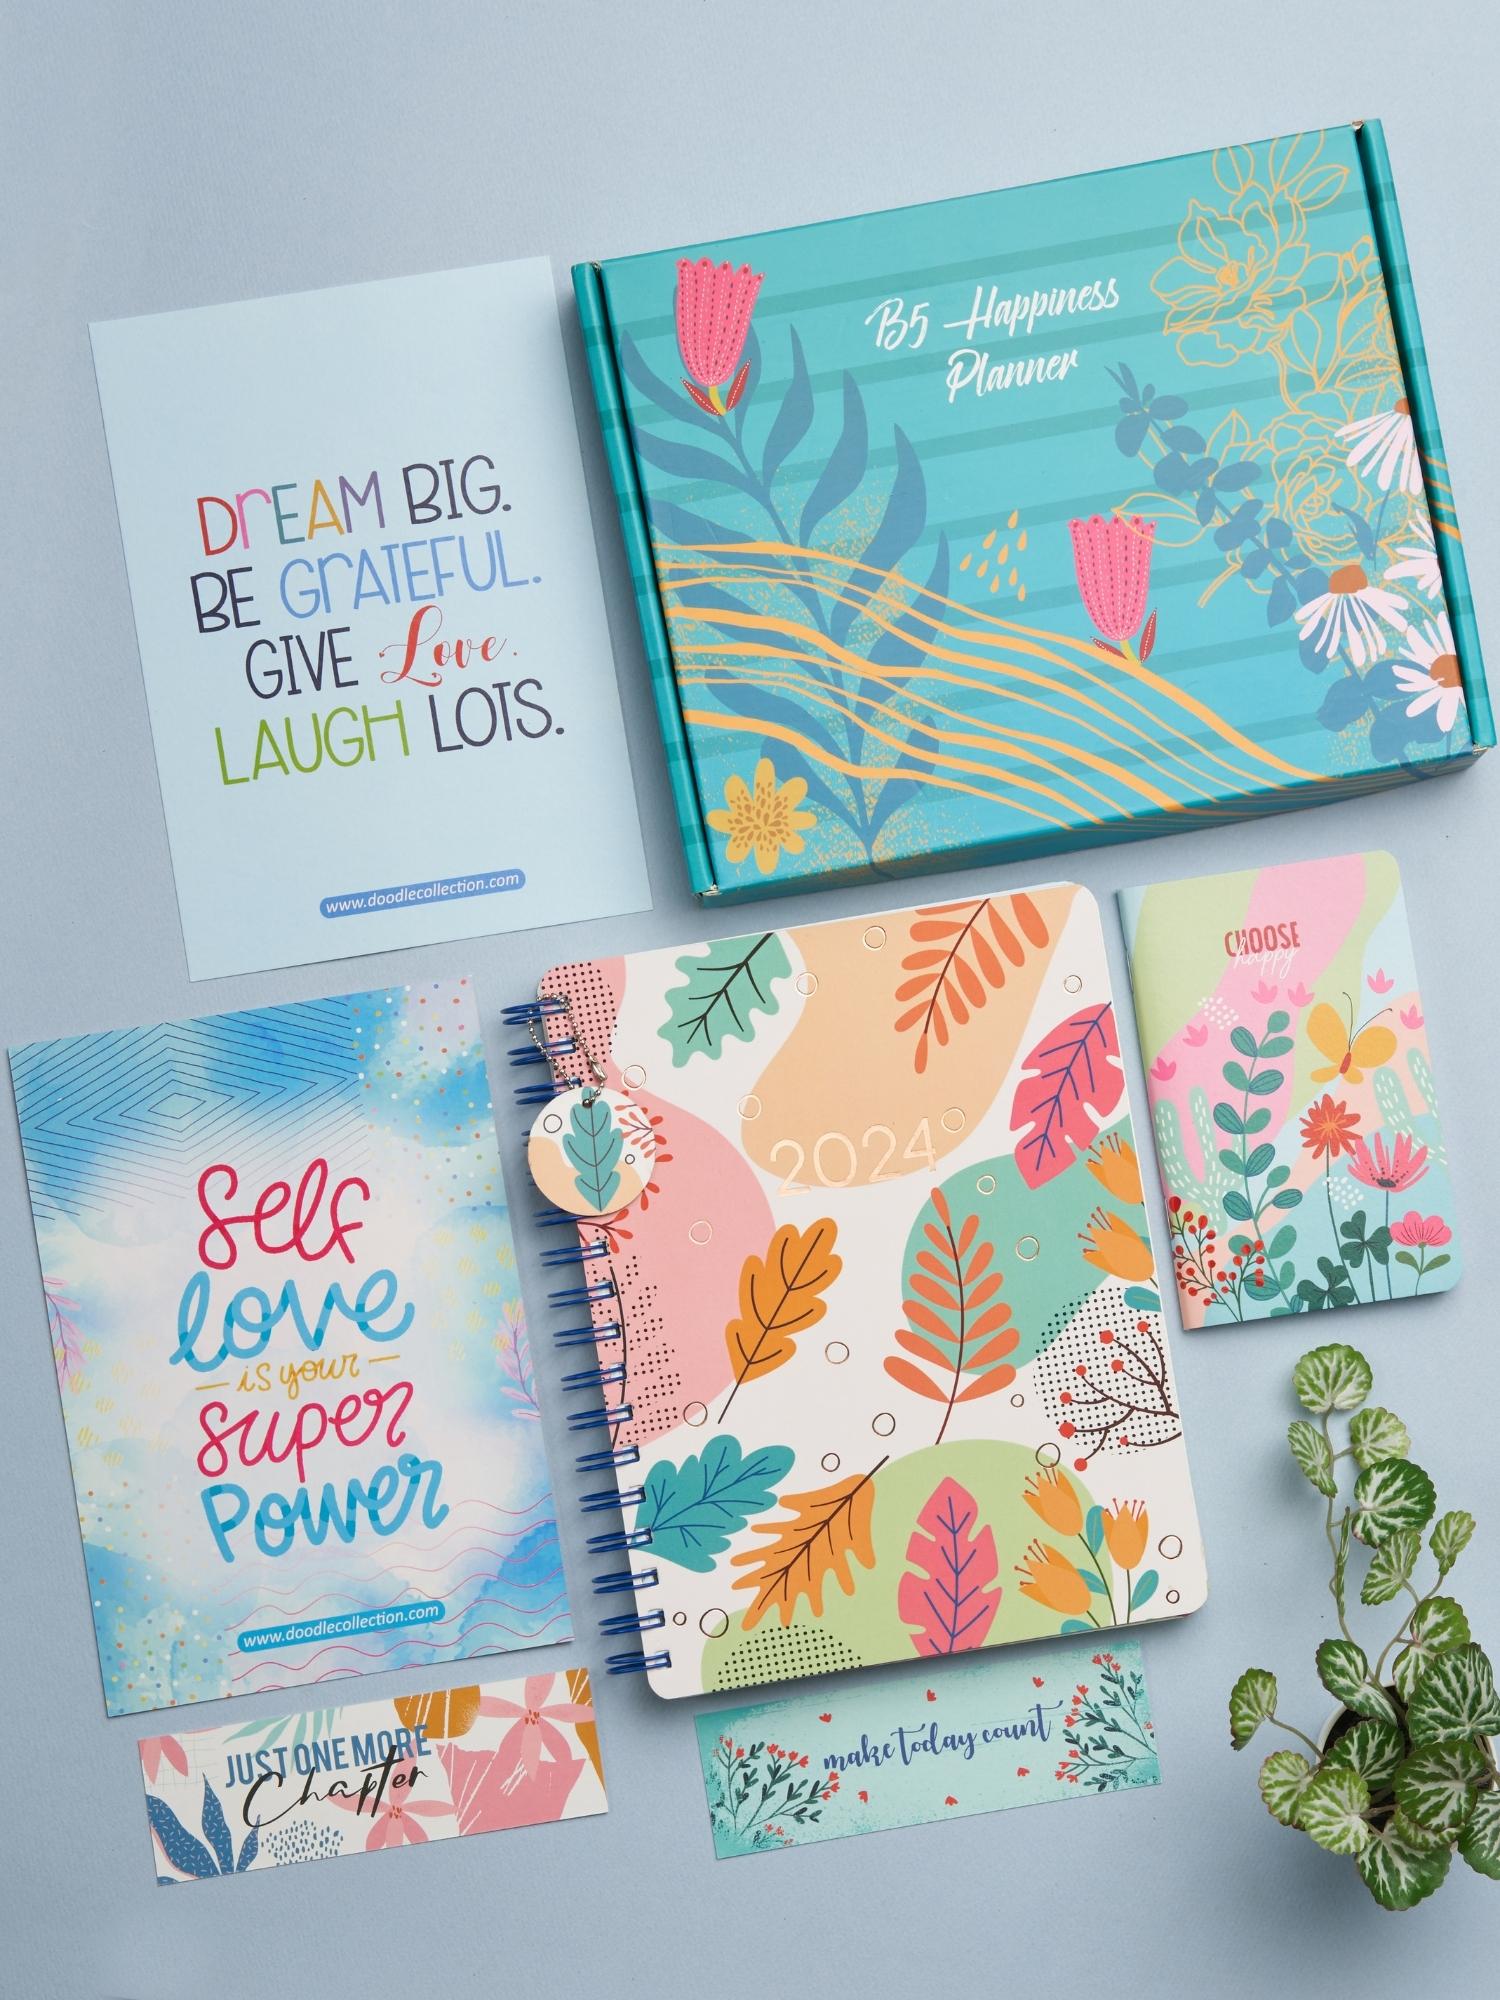 Doodle Start Anytime of the Year B5 Happiness Planner Kit (Pastel Fern)